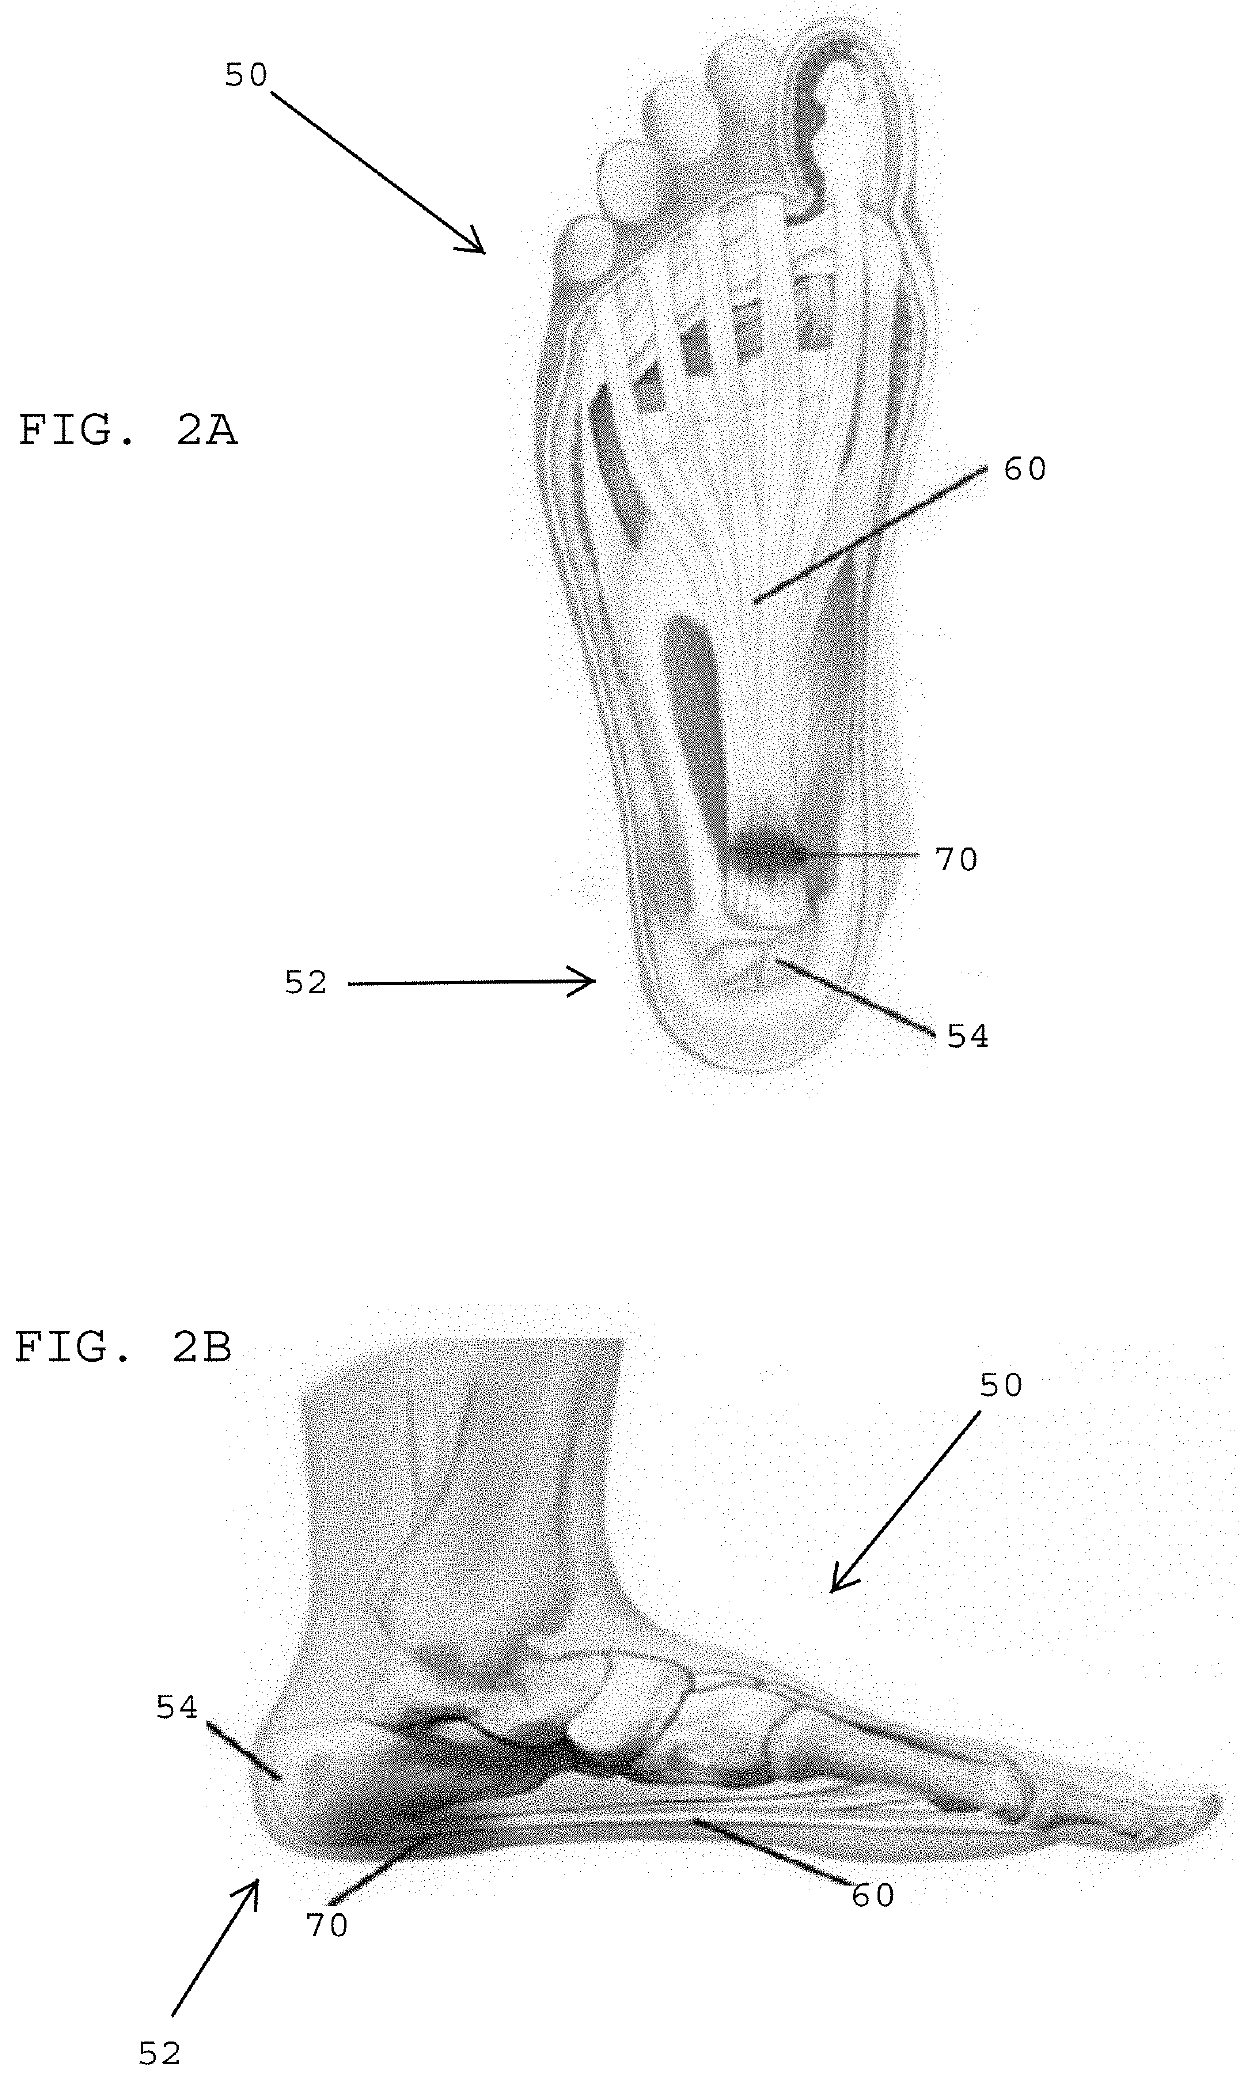 Systems, devices, and non-invasive surgical methods for treating plantar fasciitis and chronic heel spur syndrome